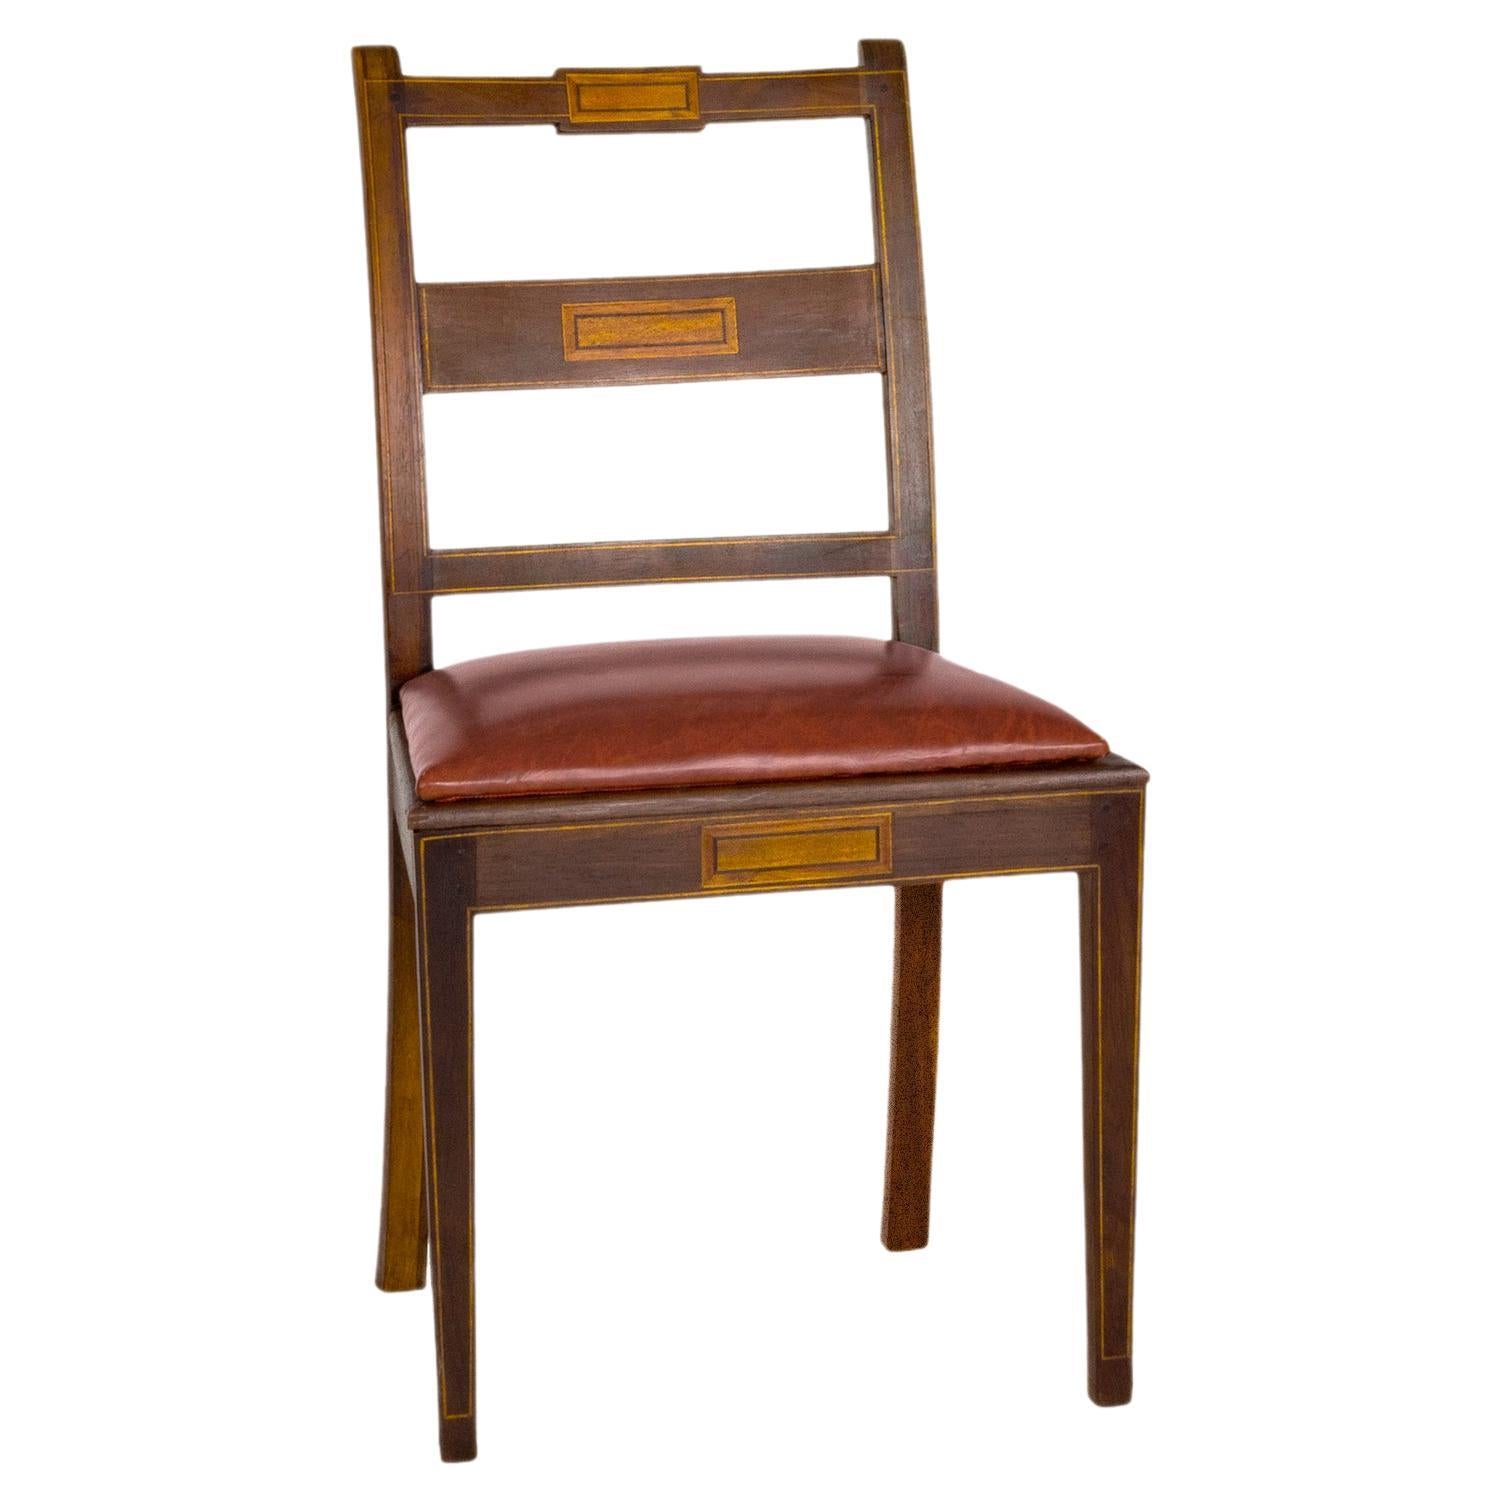 Set of Six Portuguese Chairs, Straw & Leather, 20th Century For Sale